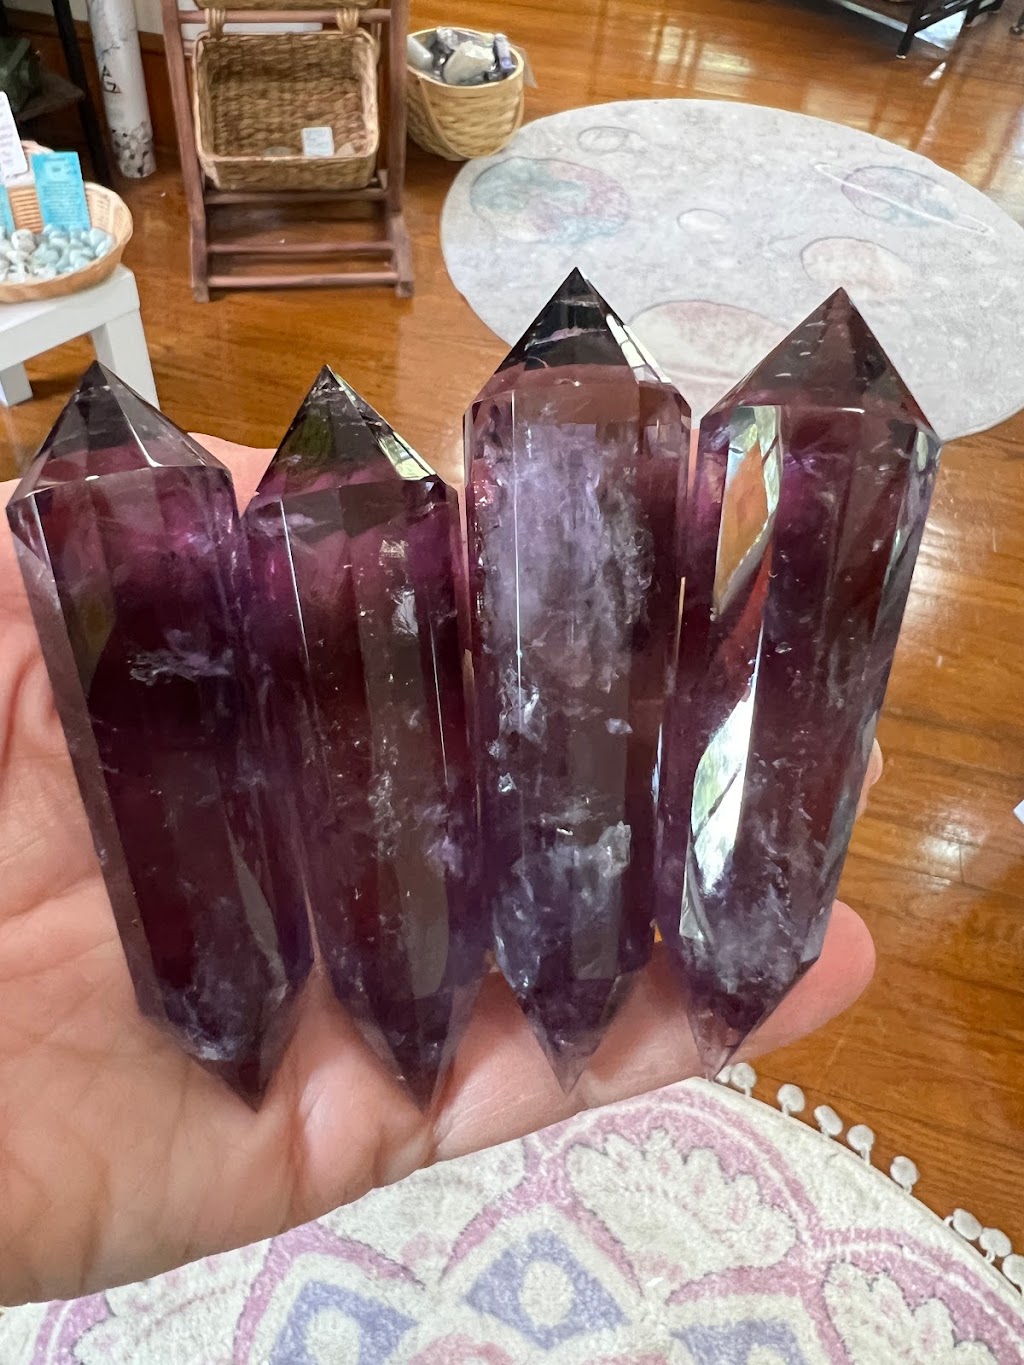 Celestial Journey Crystals | 1272 N 9th St, Stroudsburg, PA 18360 | Phone: (570) 290-8011